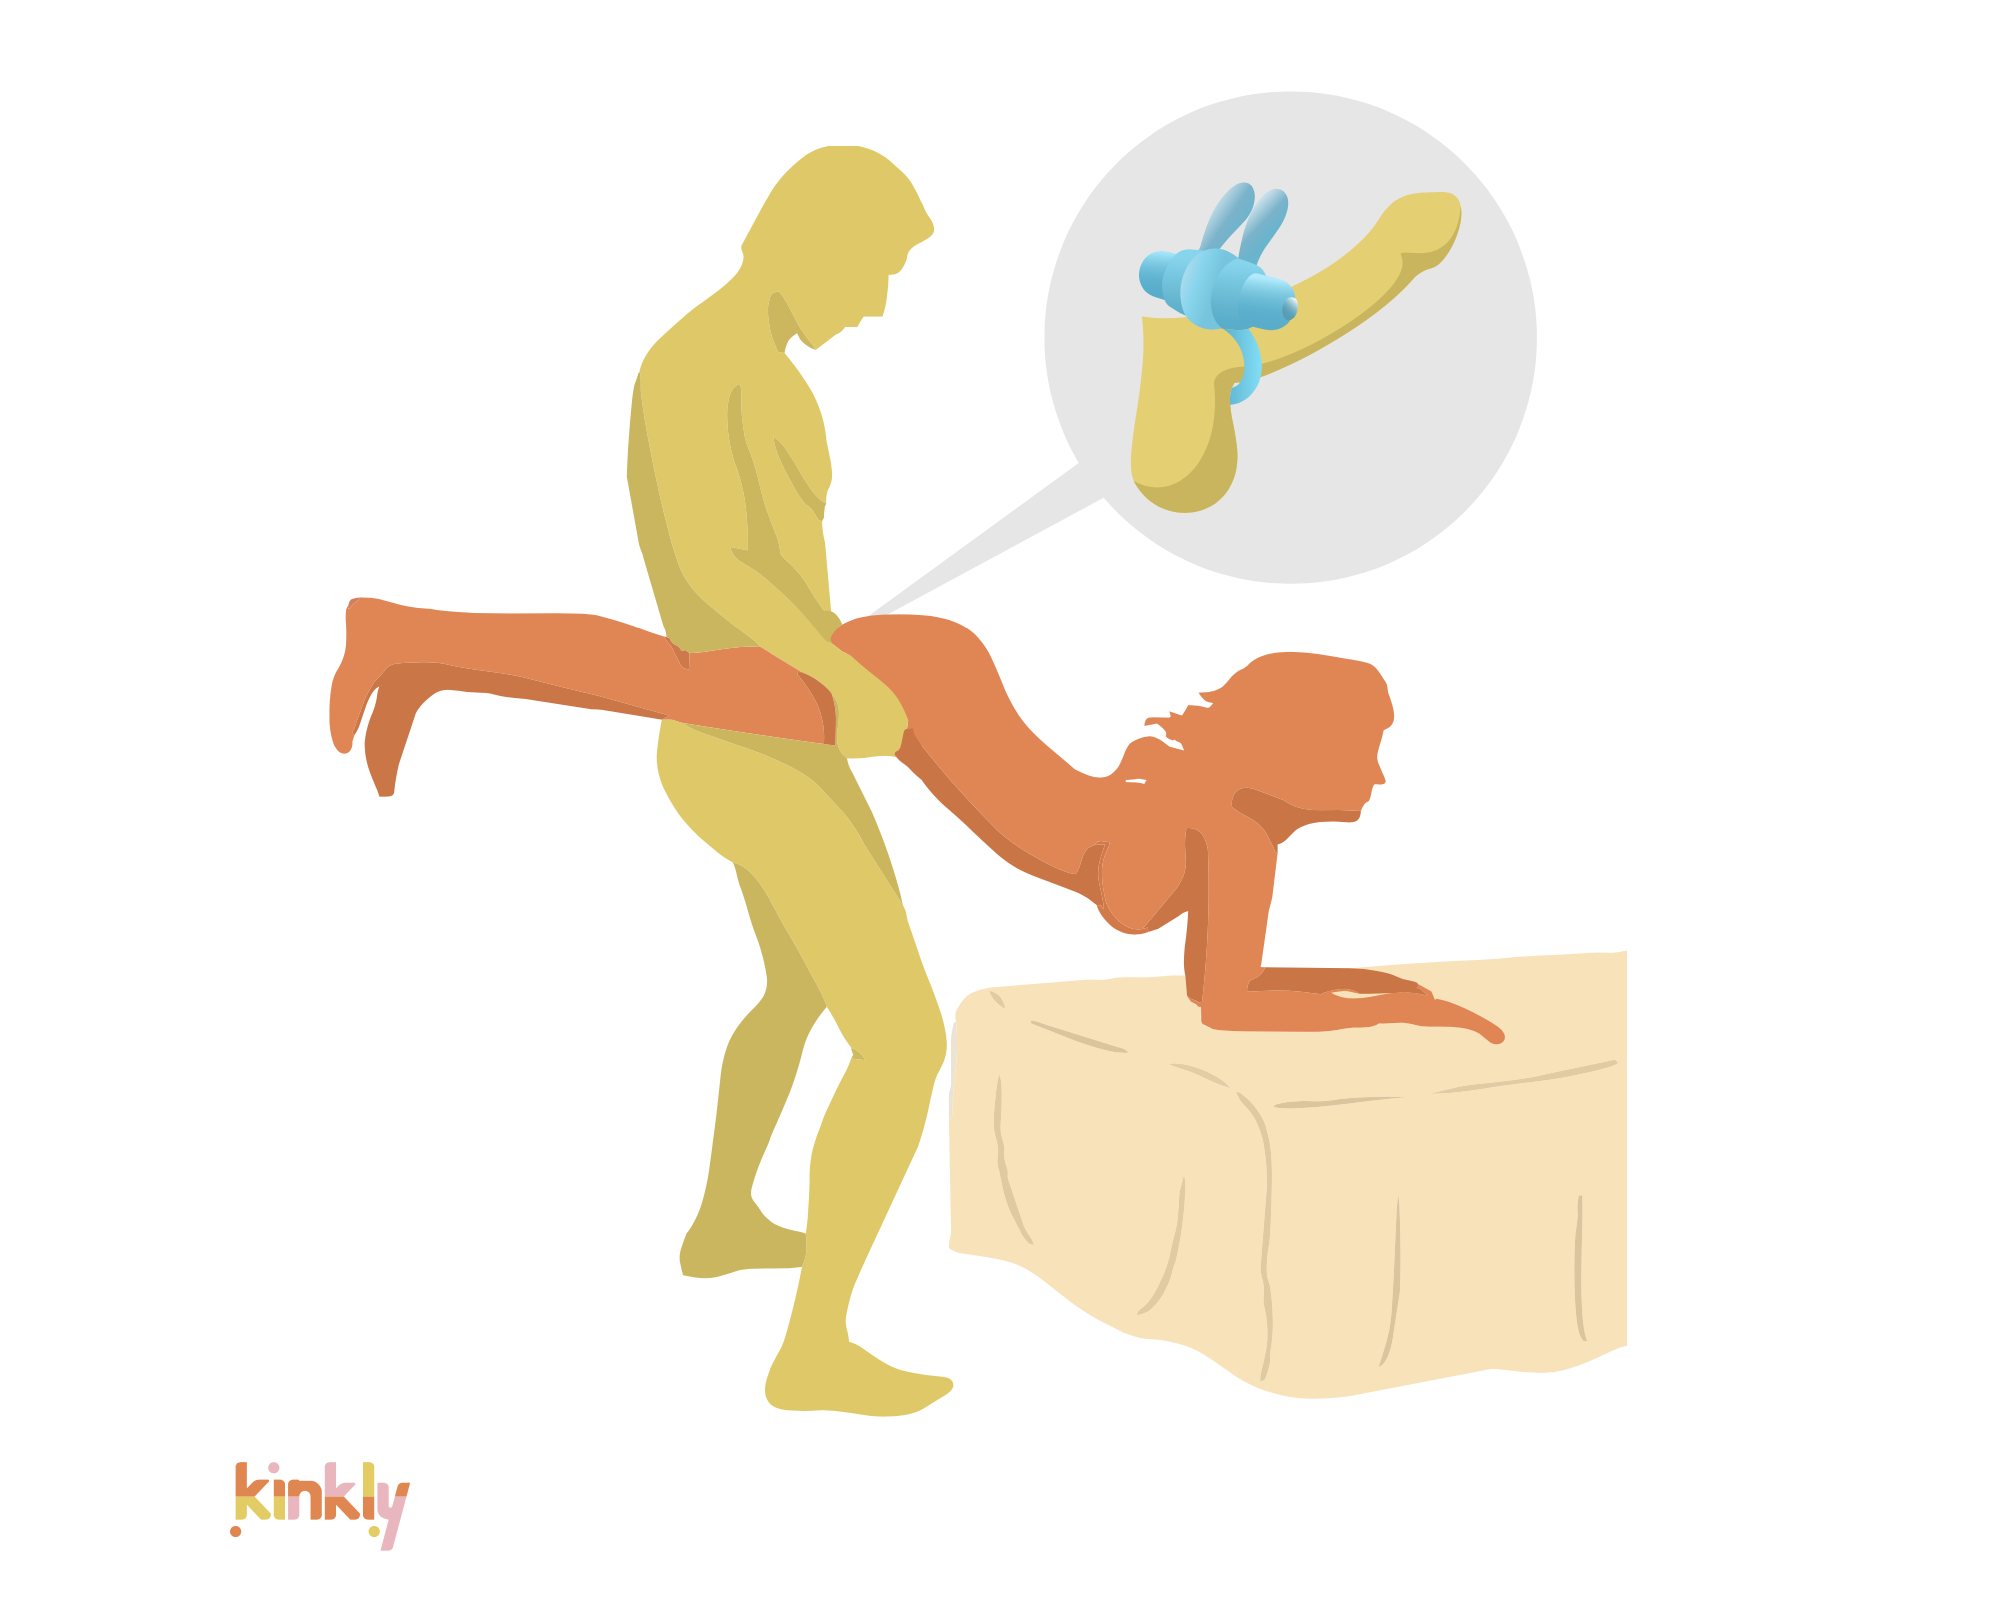 Plow Sex Position: The penetrating partner stands upright while holding the receiving partner's legs on either side of their hips and penetrating them from behind. The receiving partner has their forearms flat against a bed or table to help support their weight. The penetrating partner is wearing a cock ring.